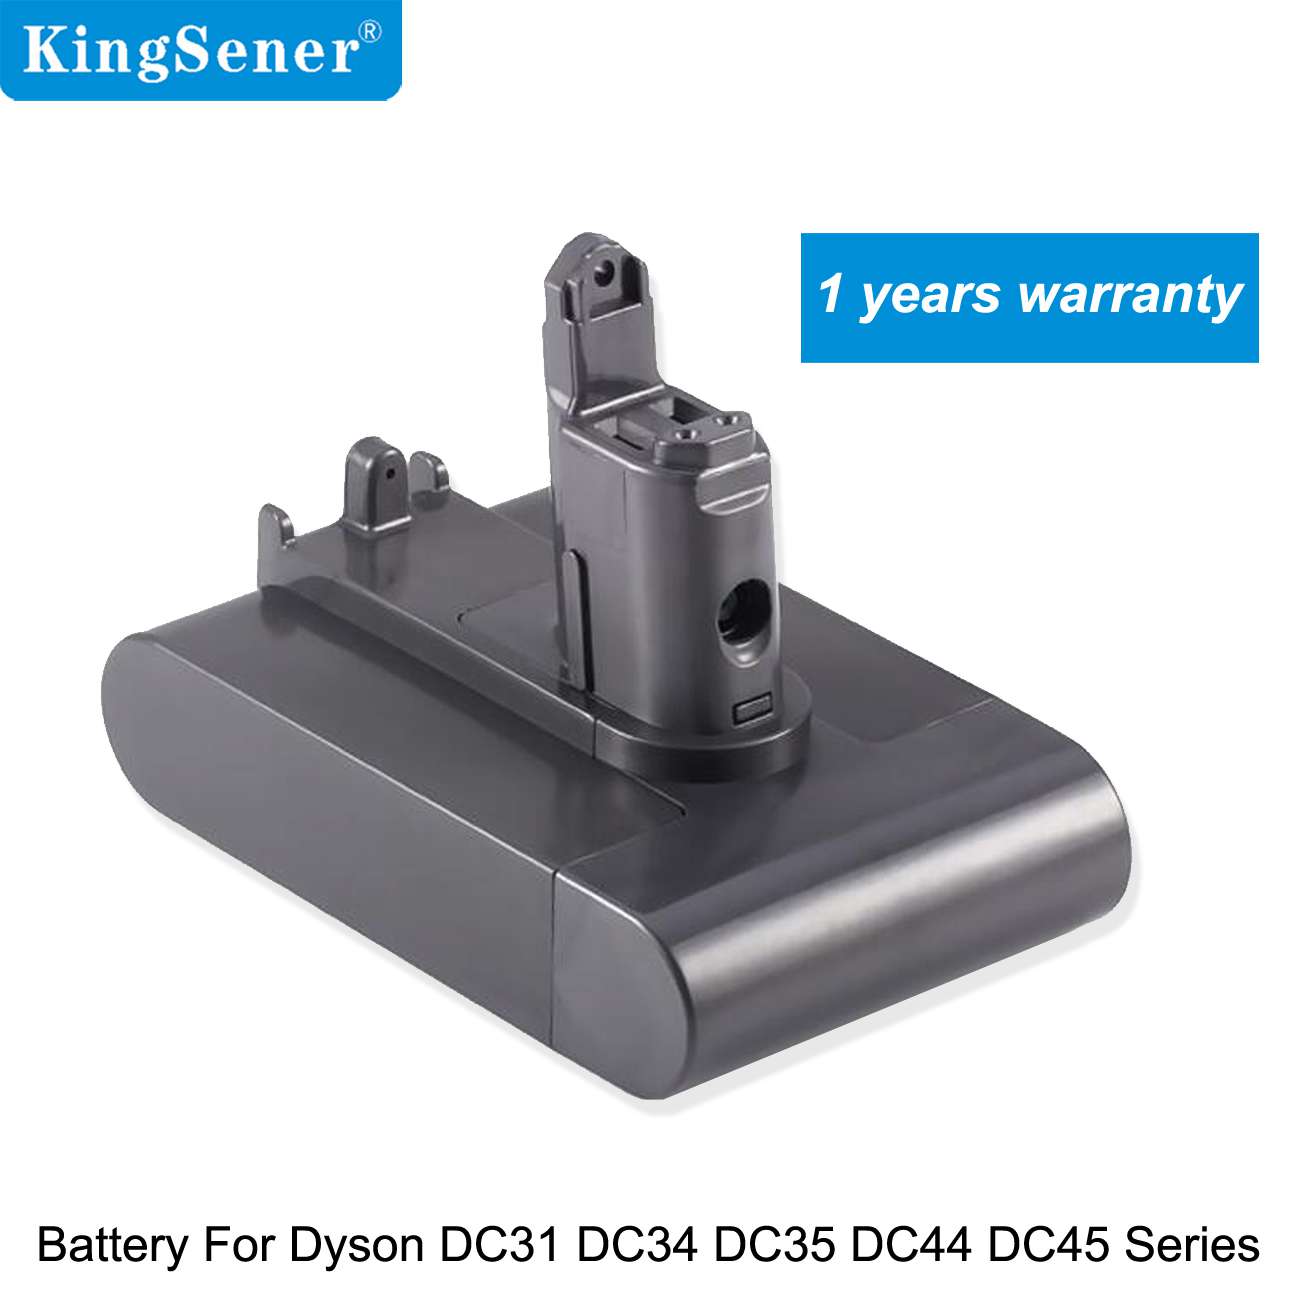 Kingsener DC34 Type B Replacement Battery for Dyson DC35 DC44 DC31